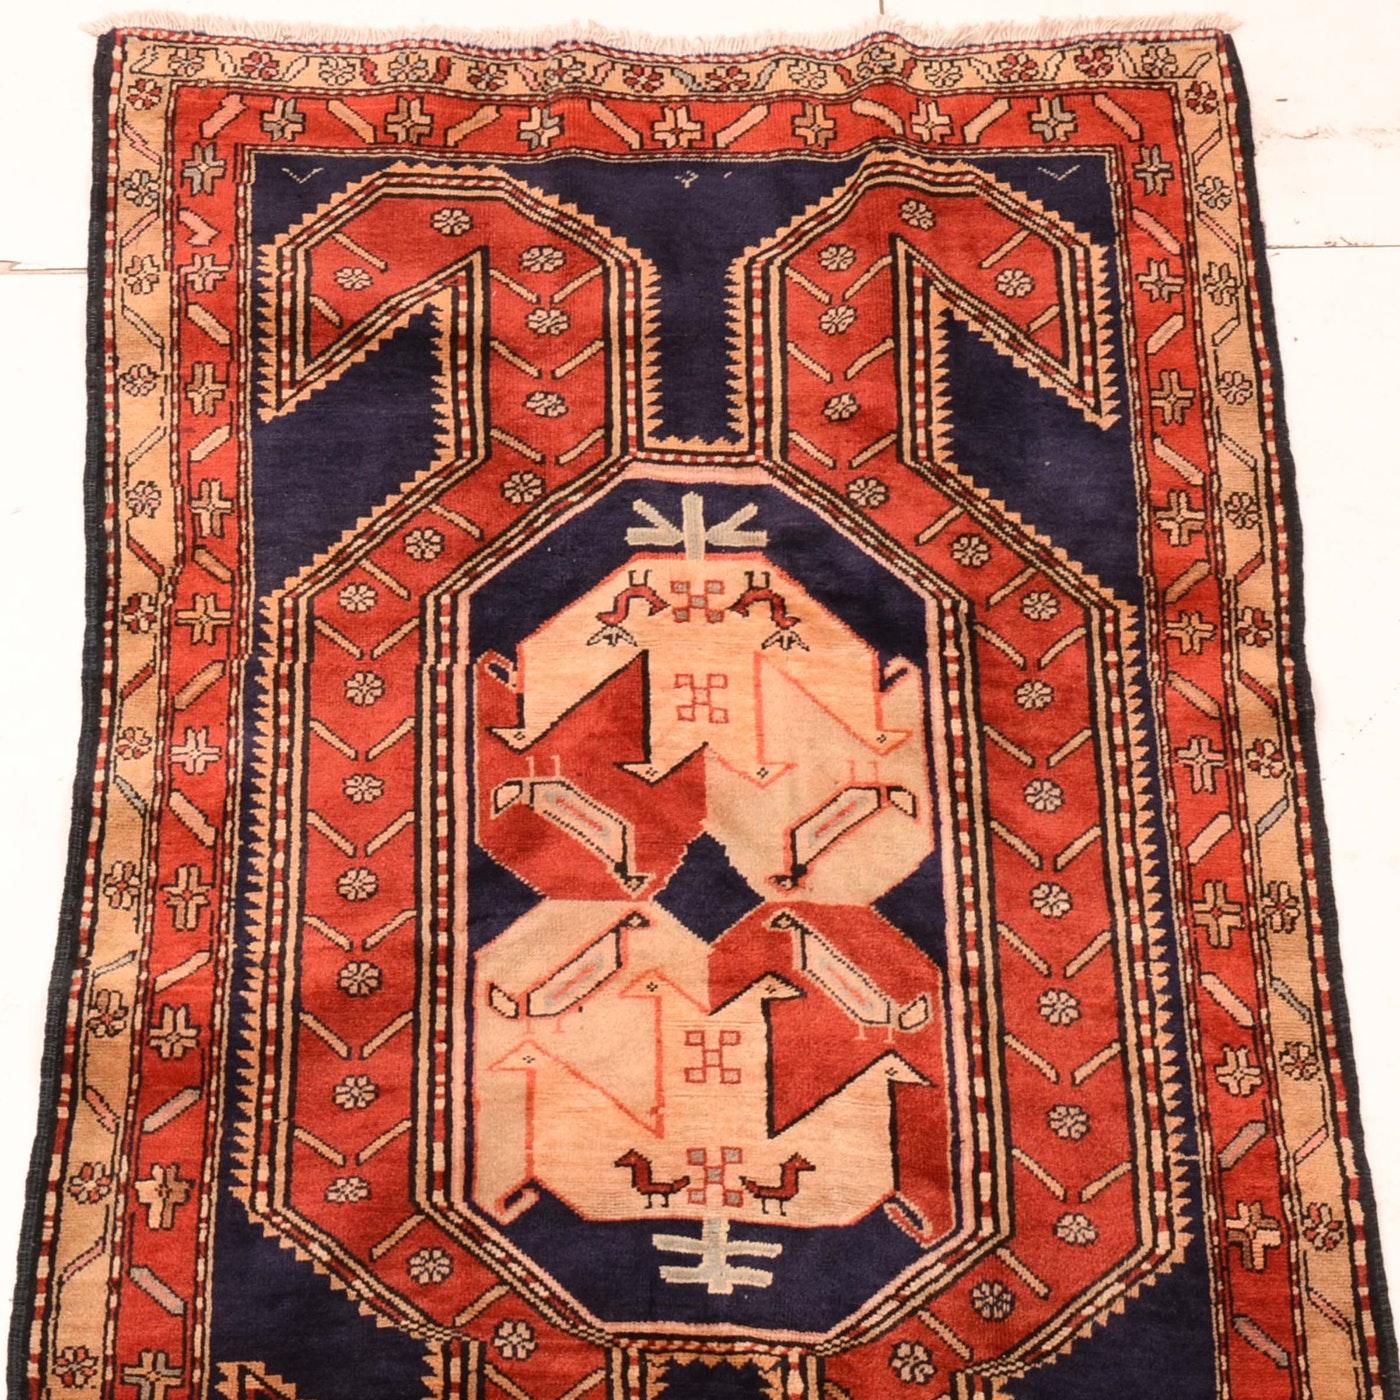 Antique all over Persian Heriz-Serapi geometric rug in an array of gorgeous colors of midnight blue, rust, blue, red and terracotta color. One of the most distinctive styles with its geometric patterns and their charm lies in a characteristic